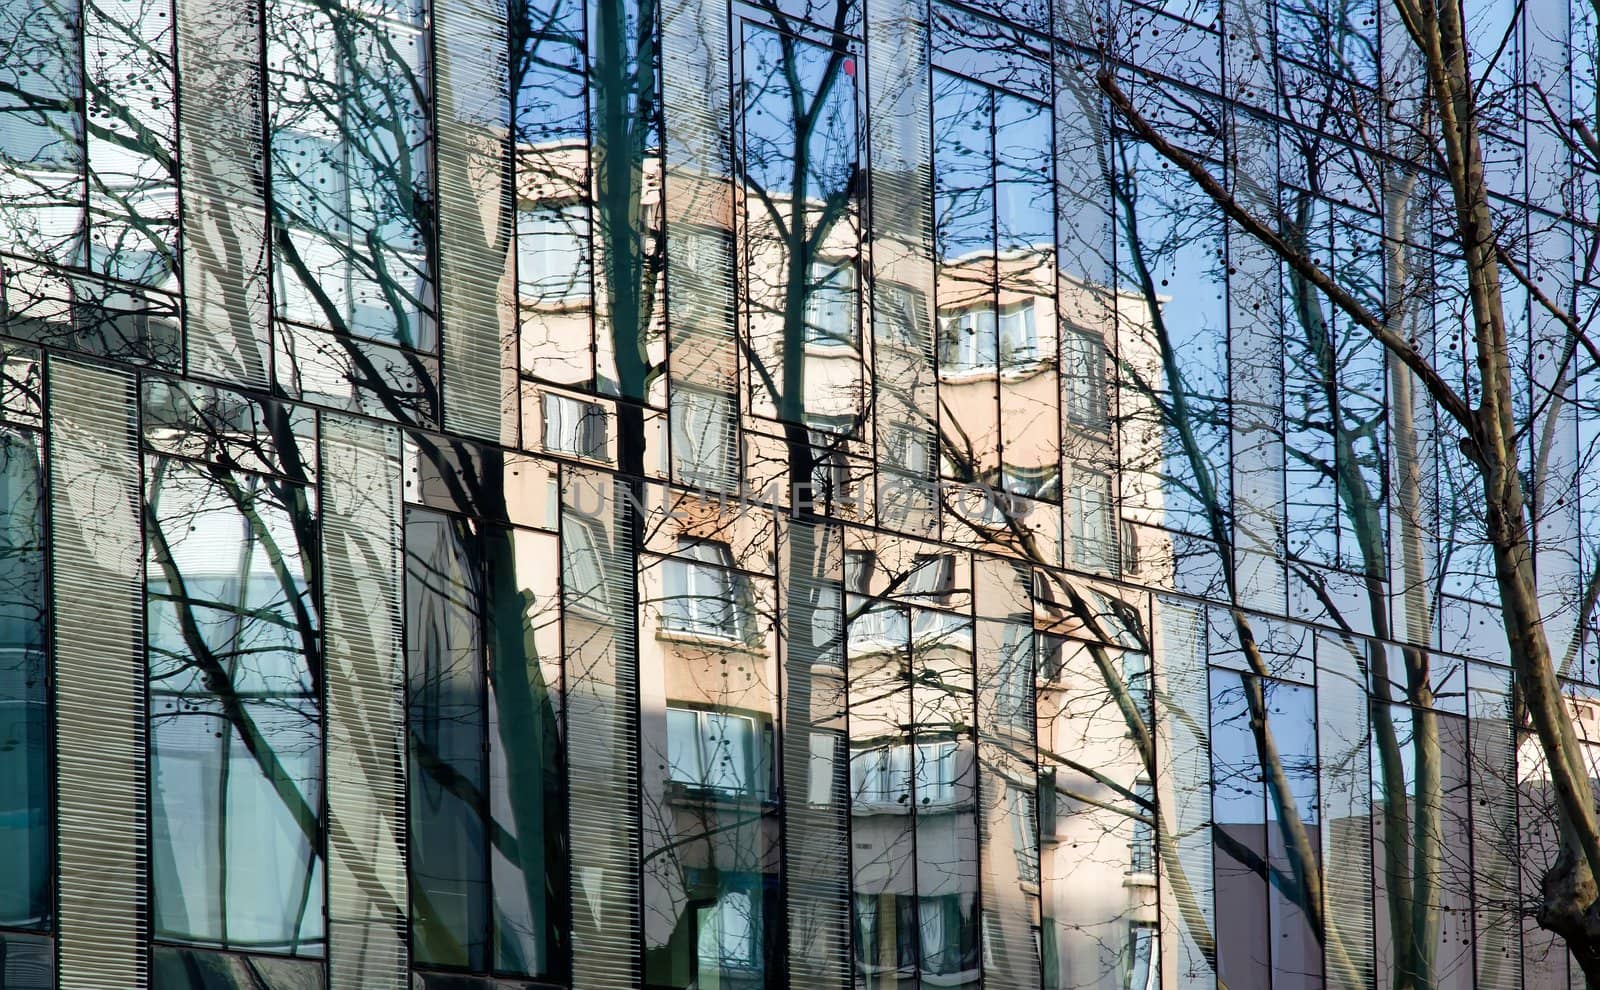 blurred reflections of trees by neko92vl